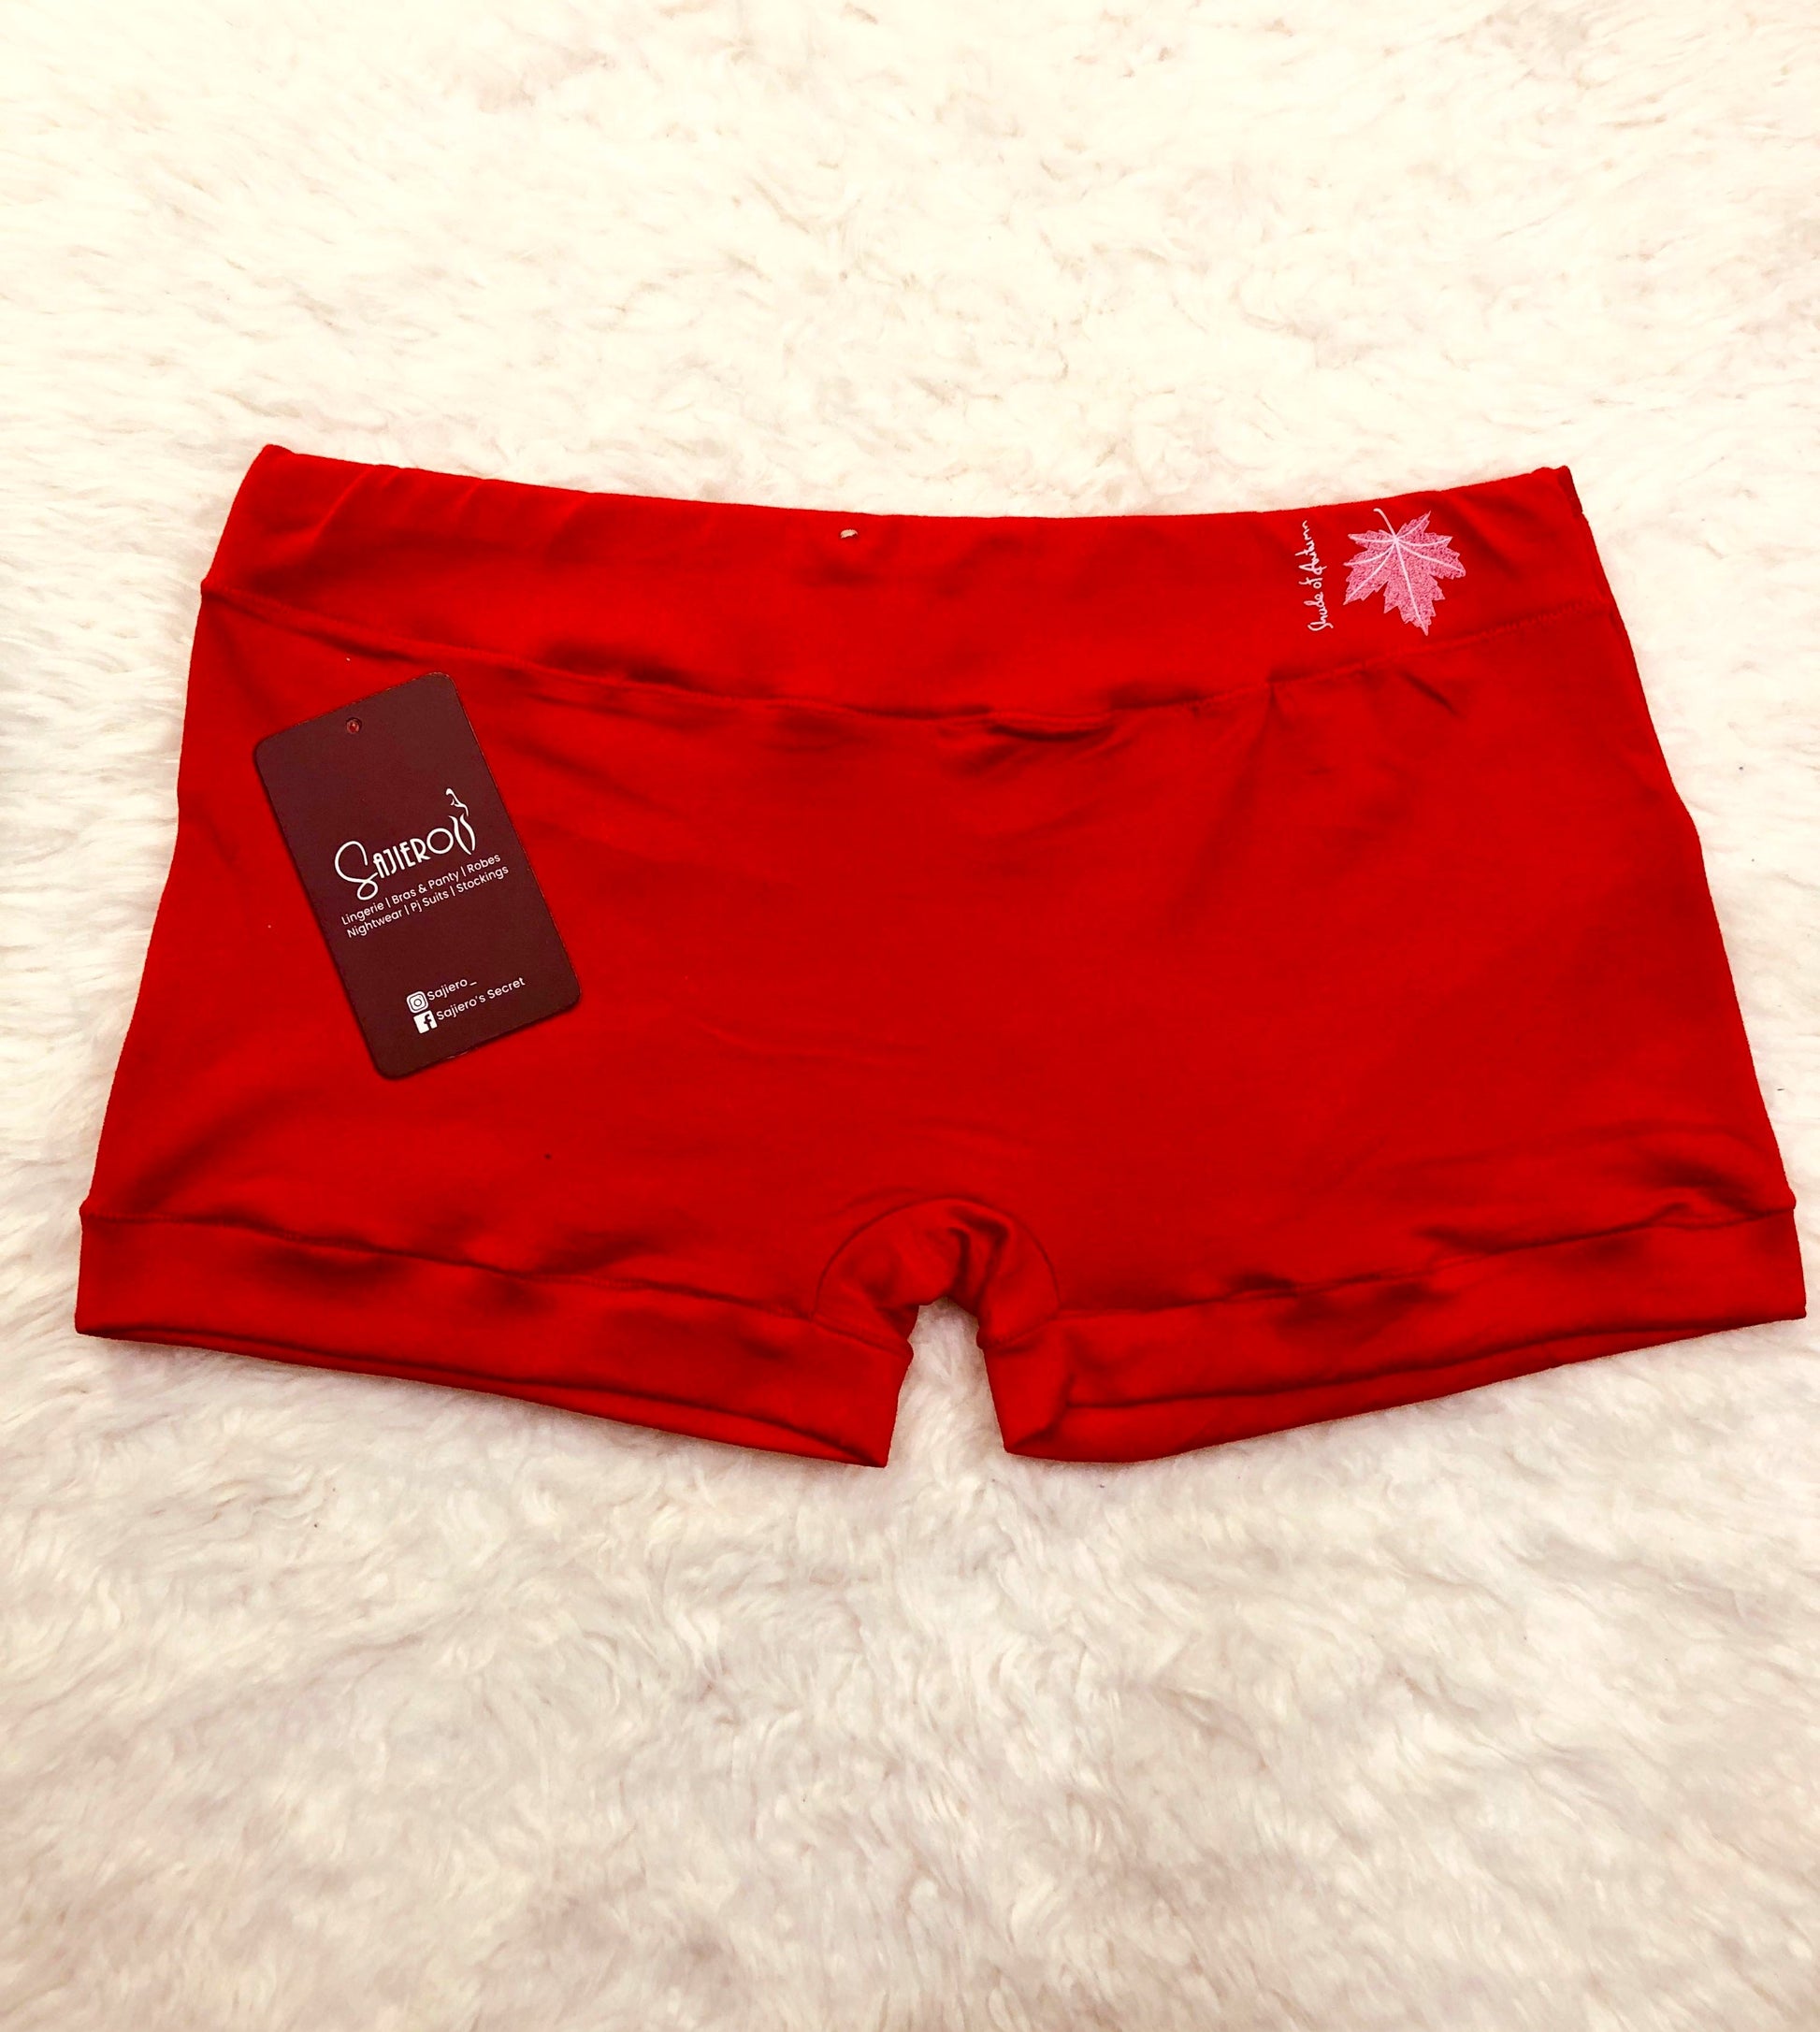 Sajiero Plain Cotton Boxer Panty good quality leakproof panties for women and ladies price in pakistan online